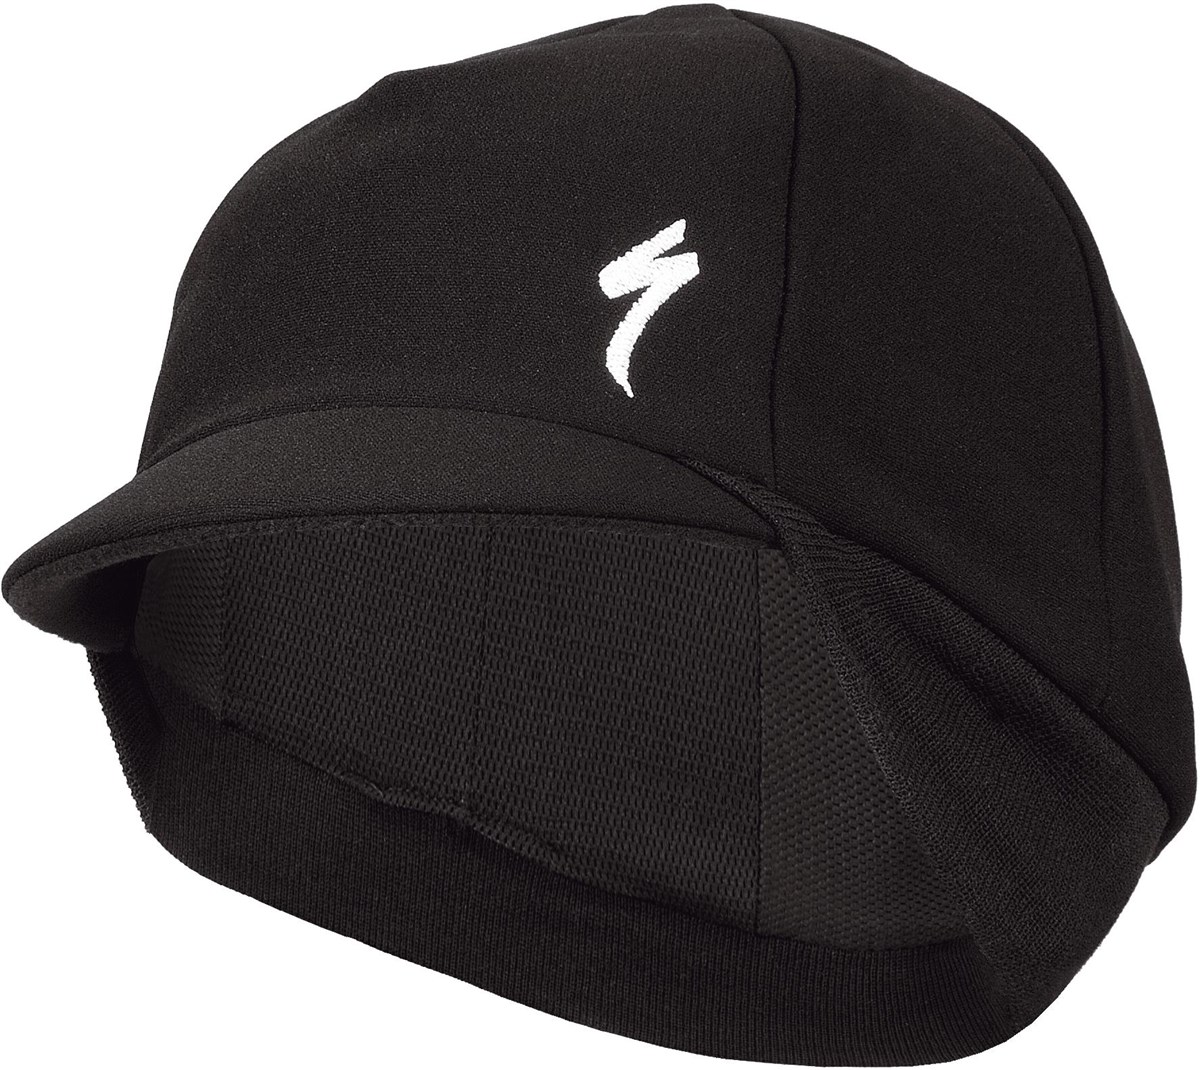 Specialized Winter Cap SS17 product image